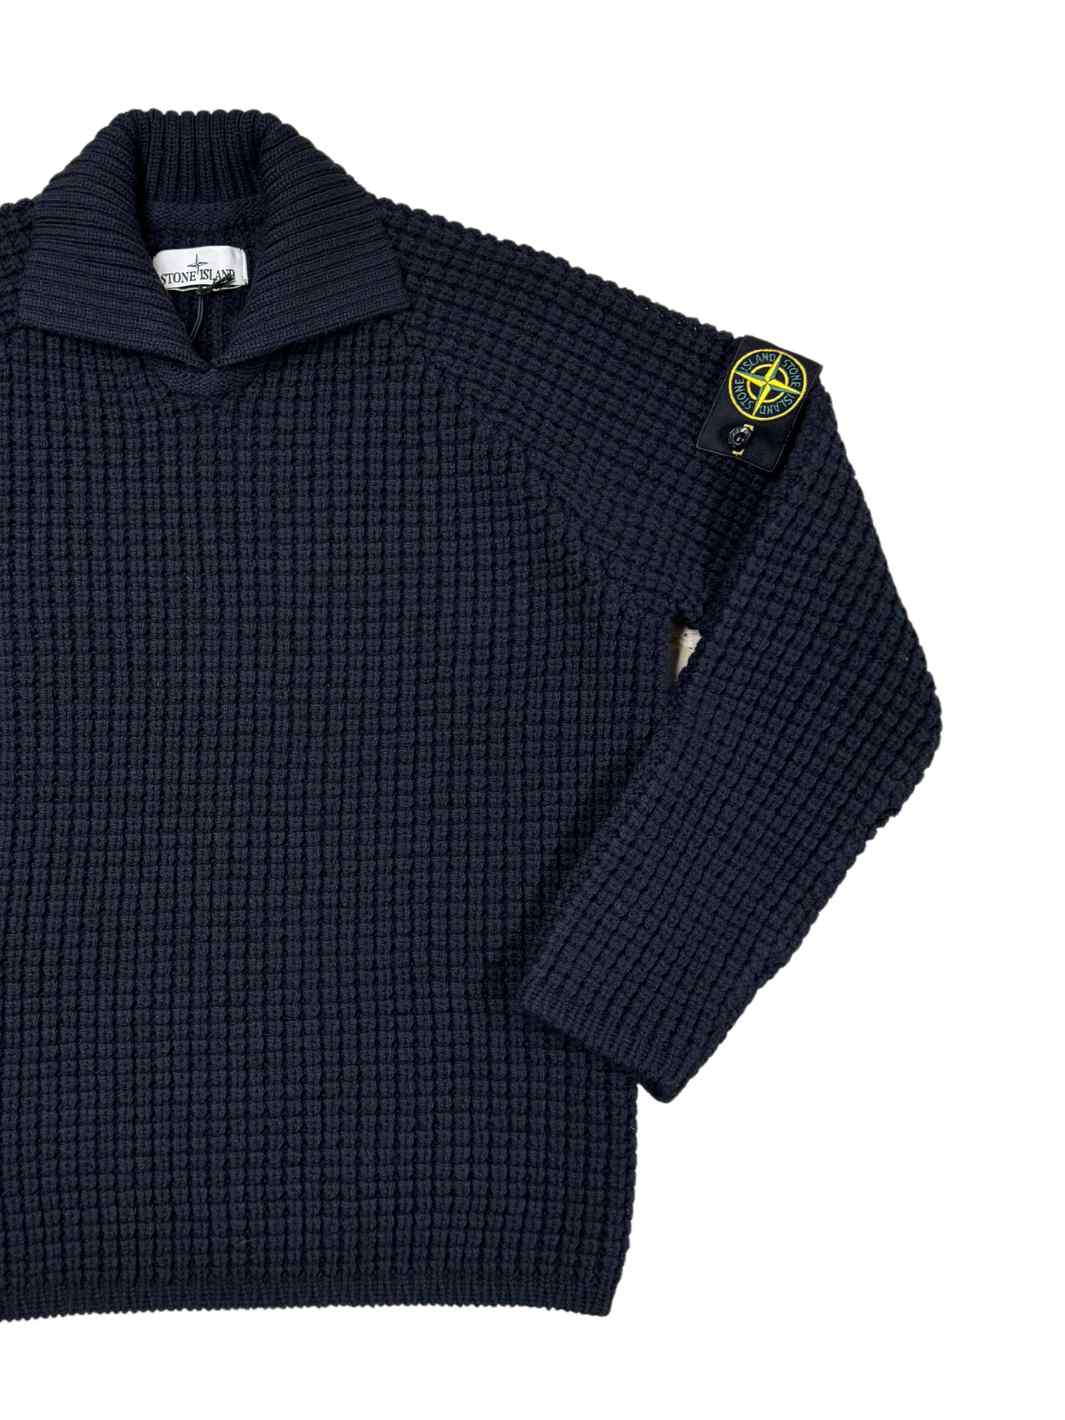 Stone Island Knit Genser | Maglia Knitted Sweater